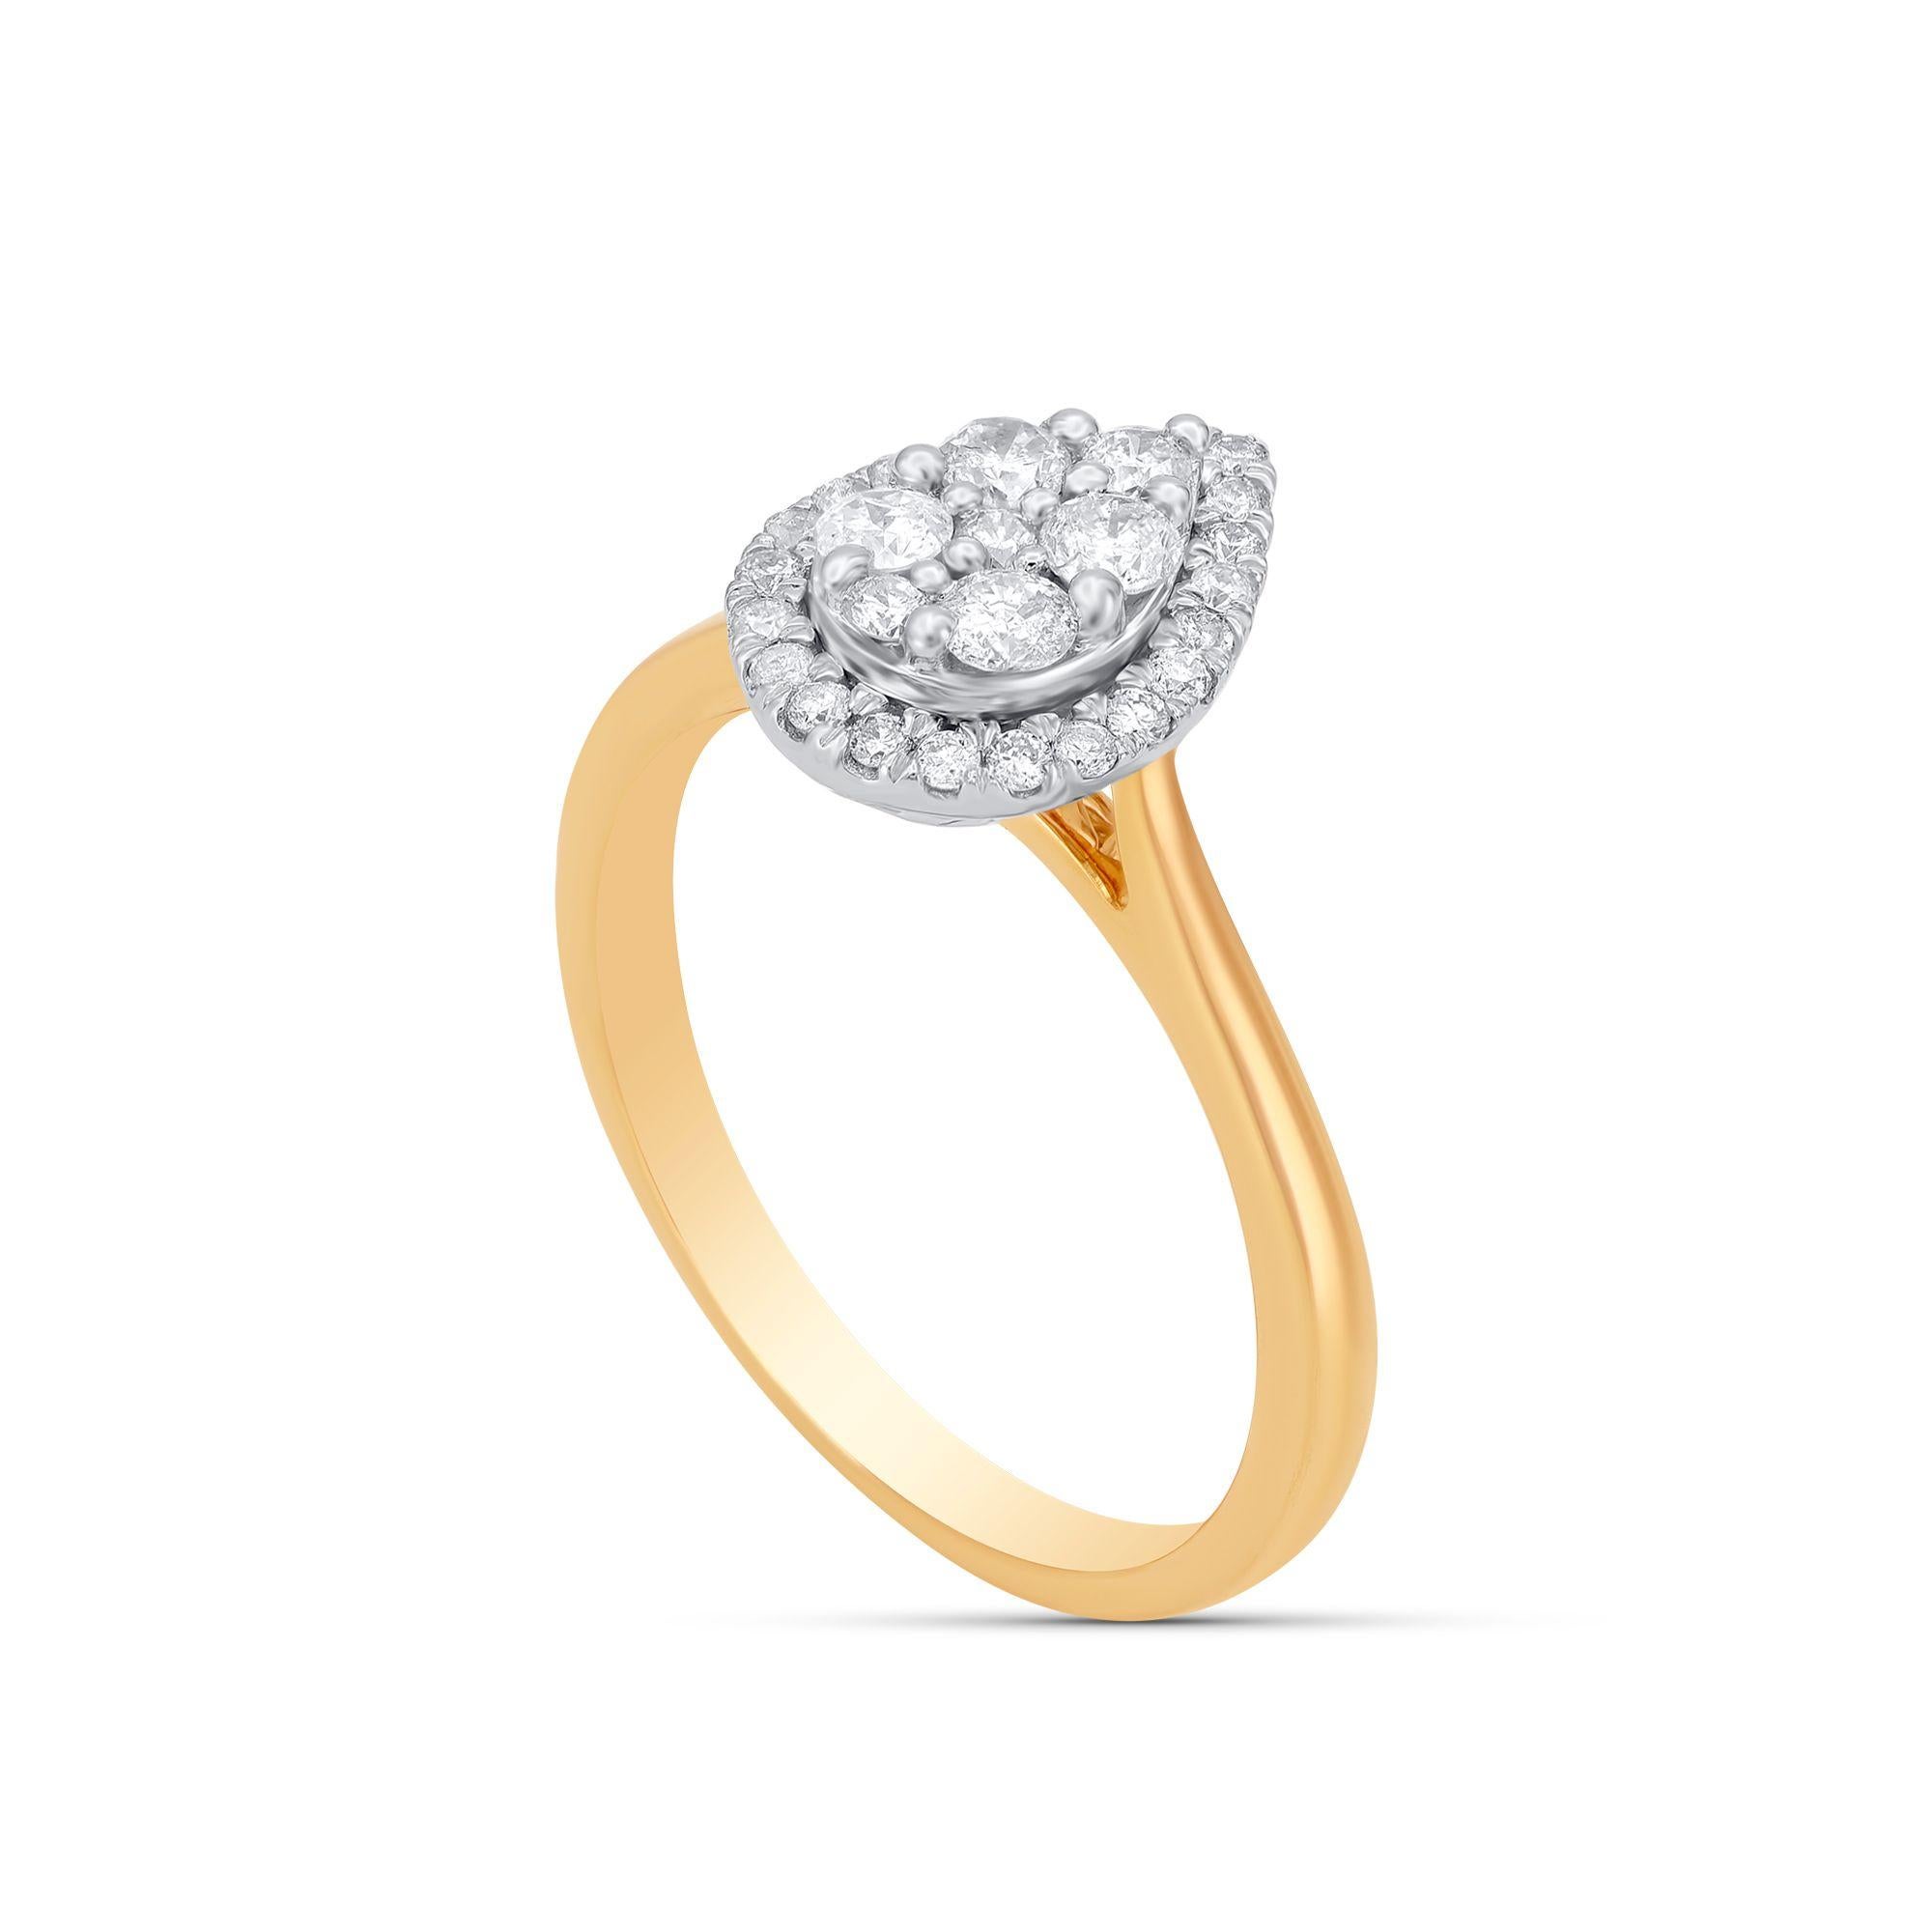 This pear shaped diamond engagement ring is crafted in 10 kt yellow gold and studded with 29 round-cut diamonds in pressure and micro-prong setting, diamonds are graded H-I Color, I2 Clarity. 
